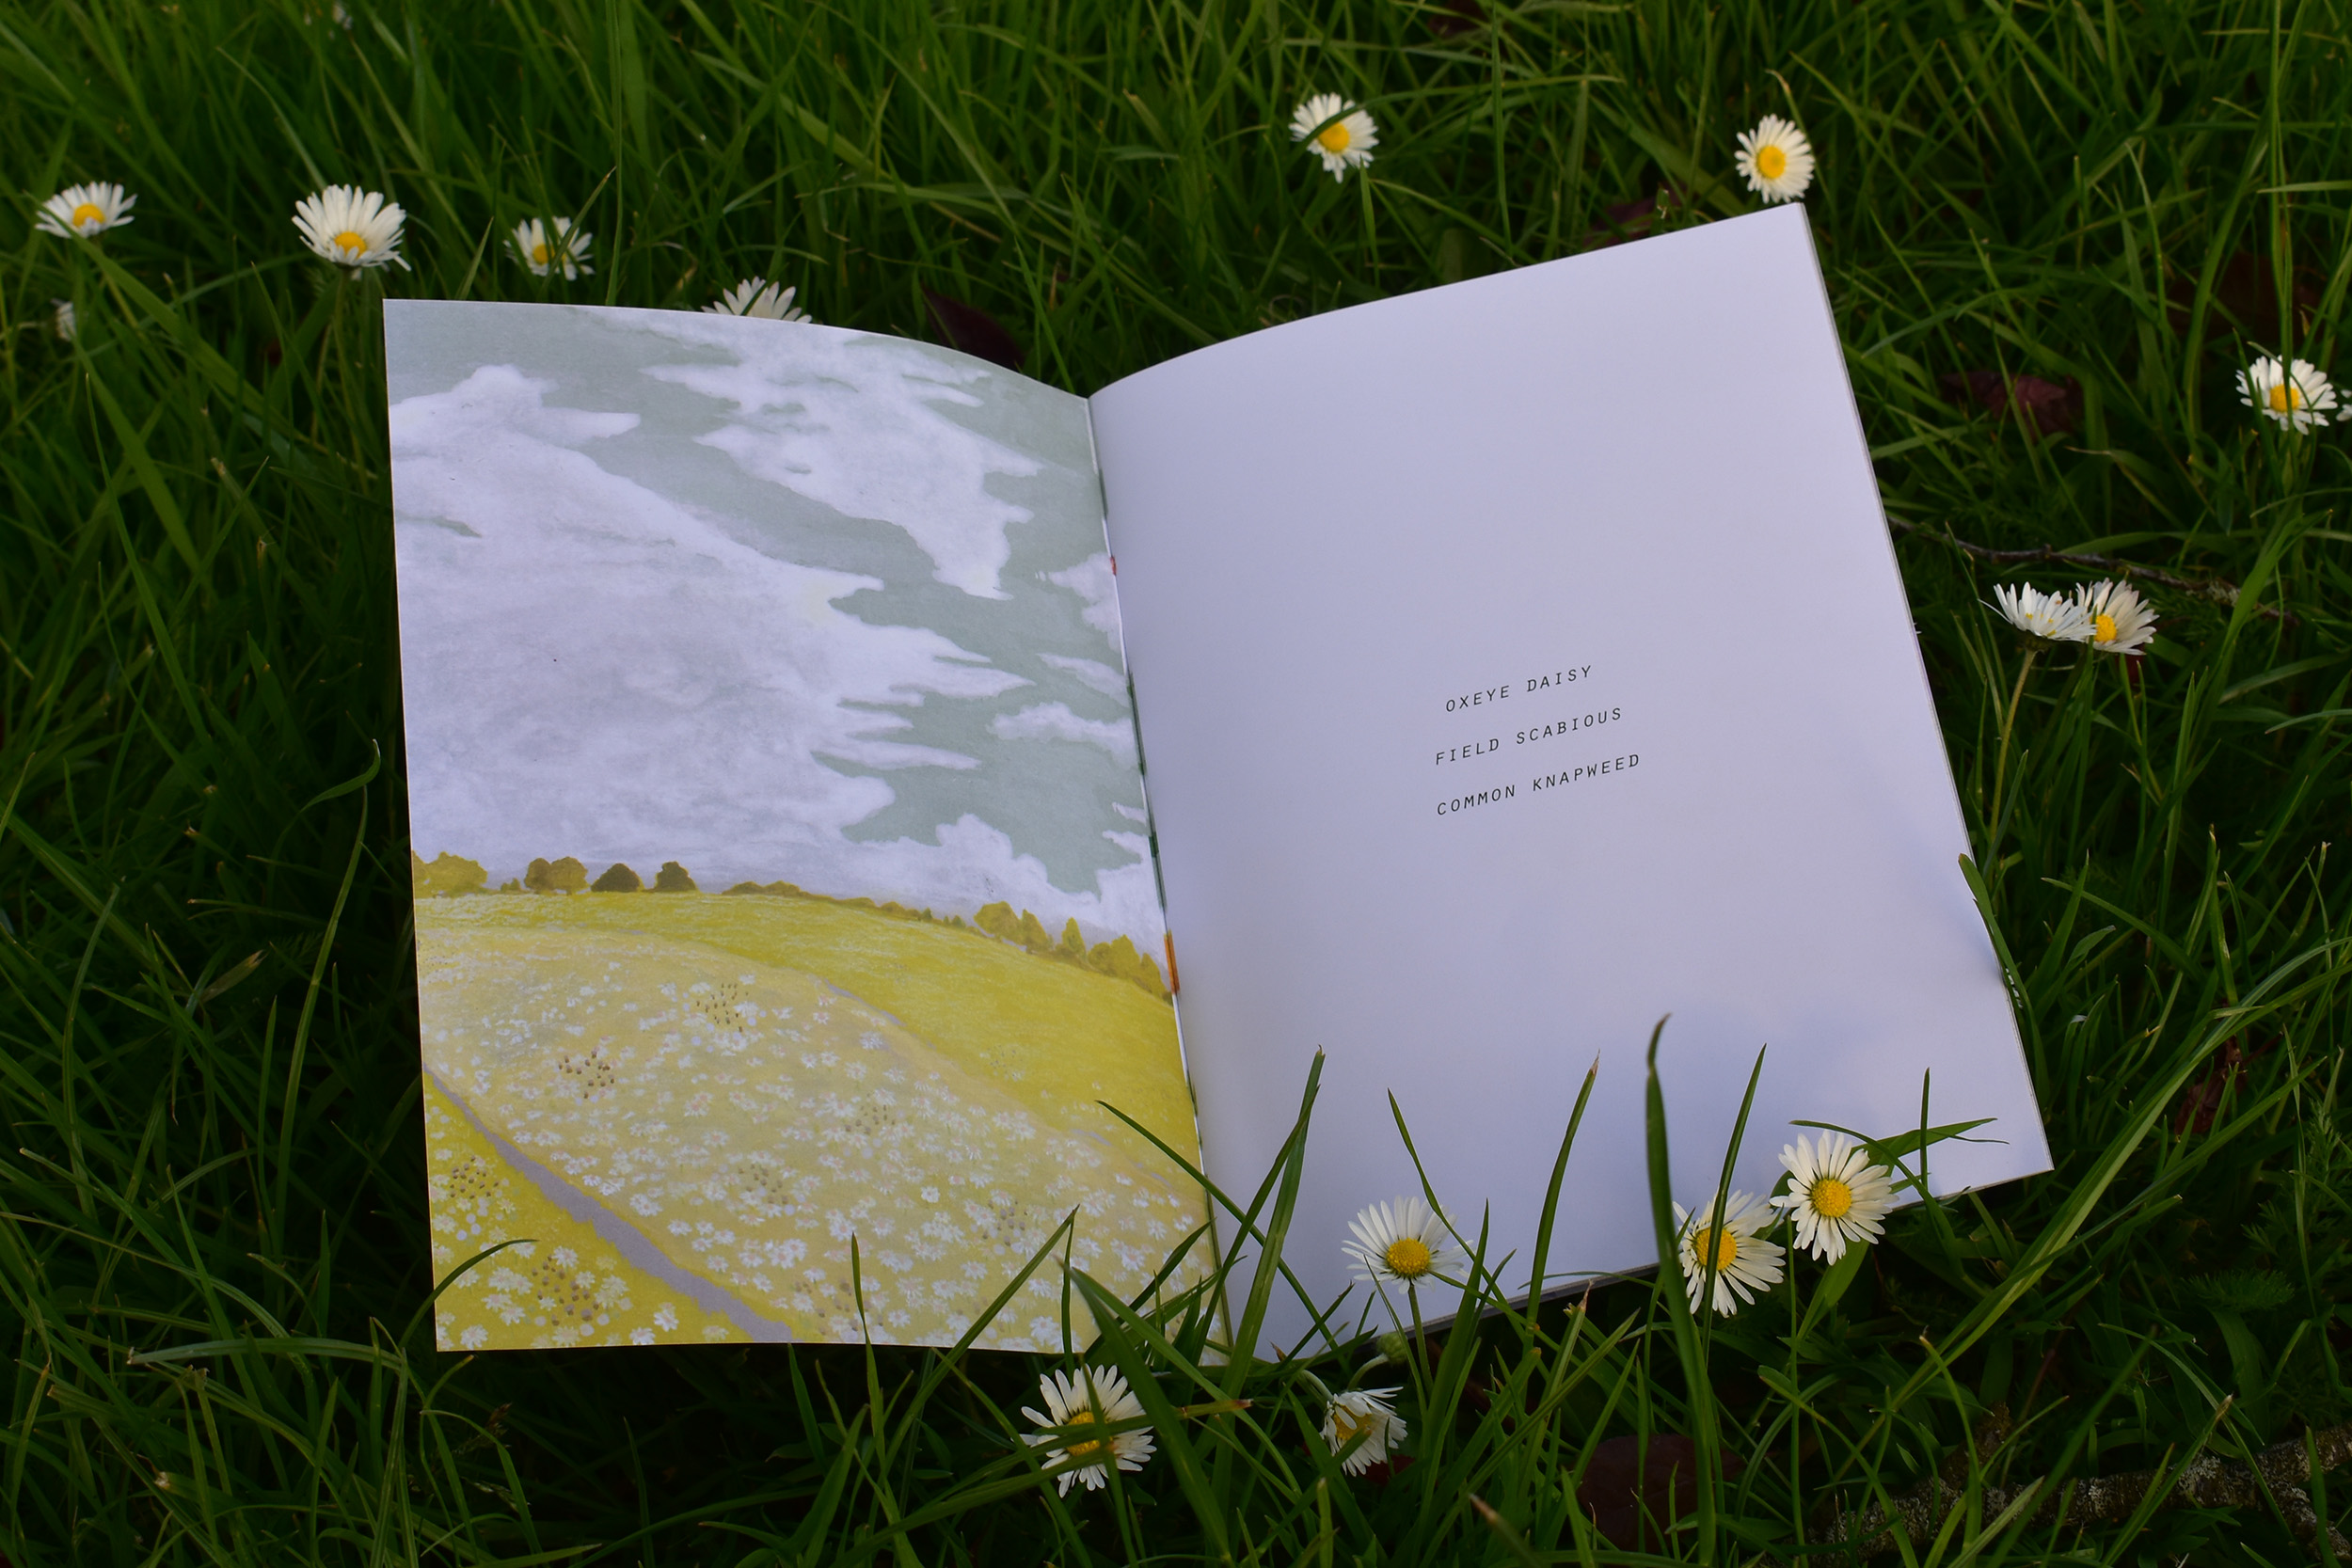 An image of a printed booklet placed on grass, it shows a gouache landscape painting of a cloudy sky and a field of daisies.